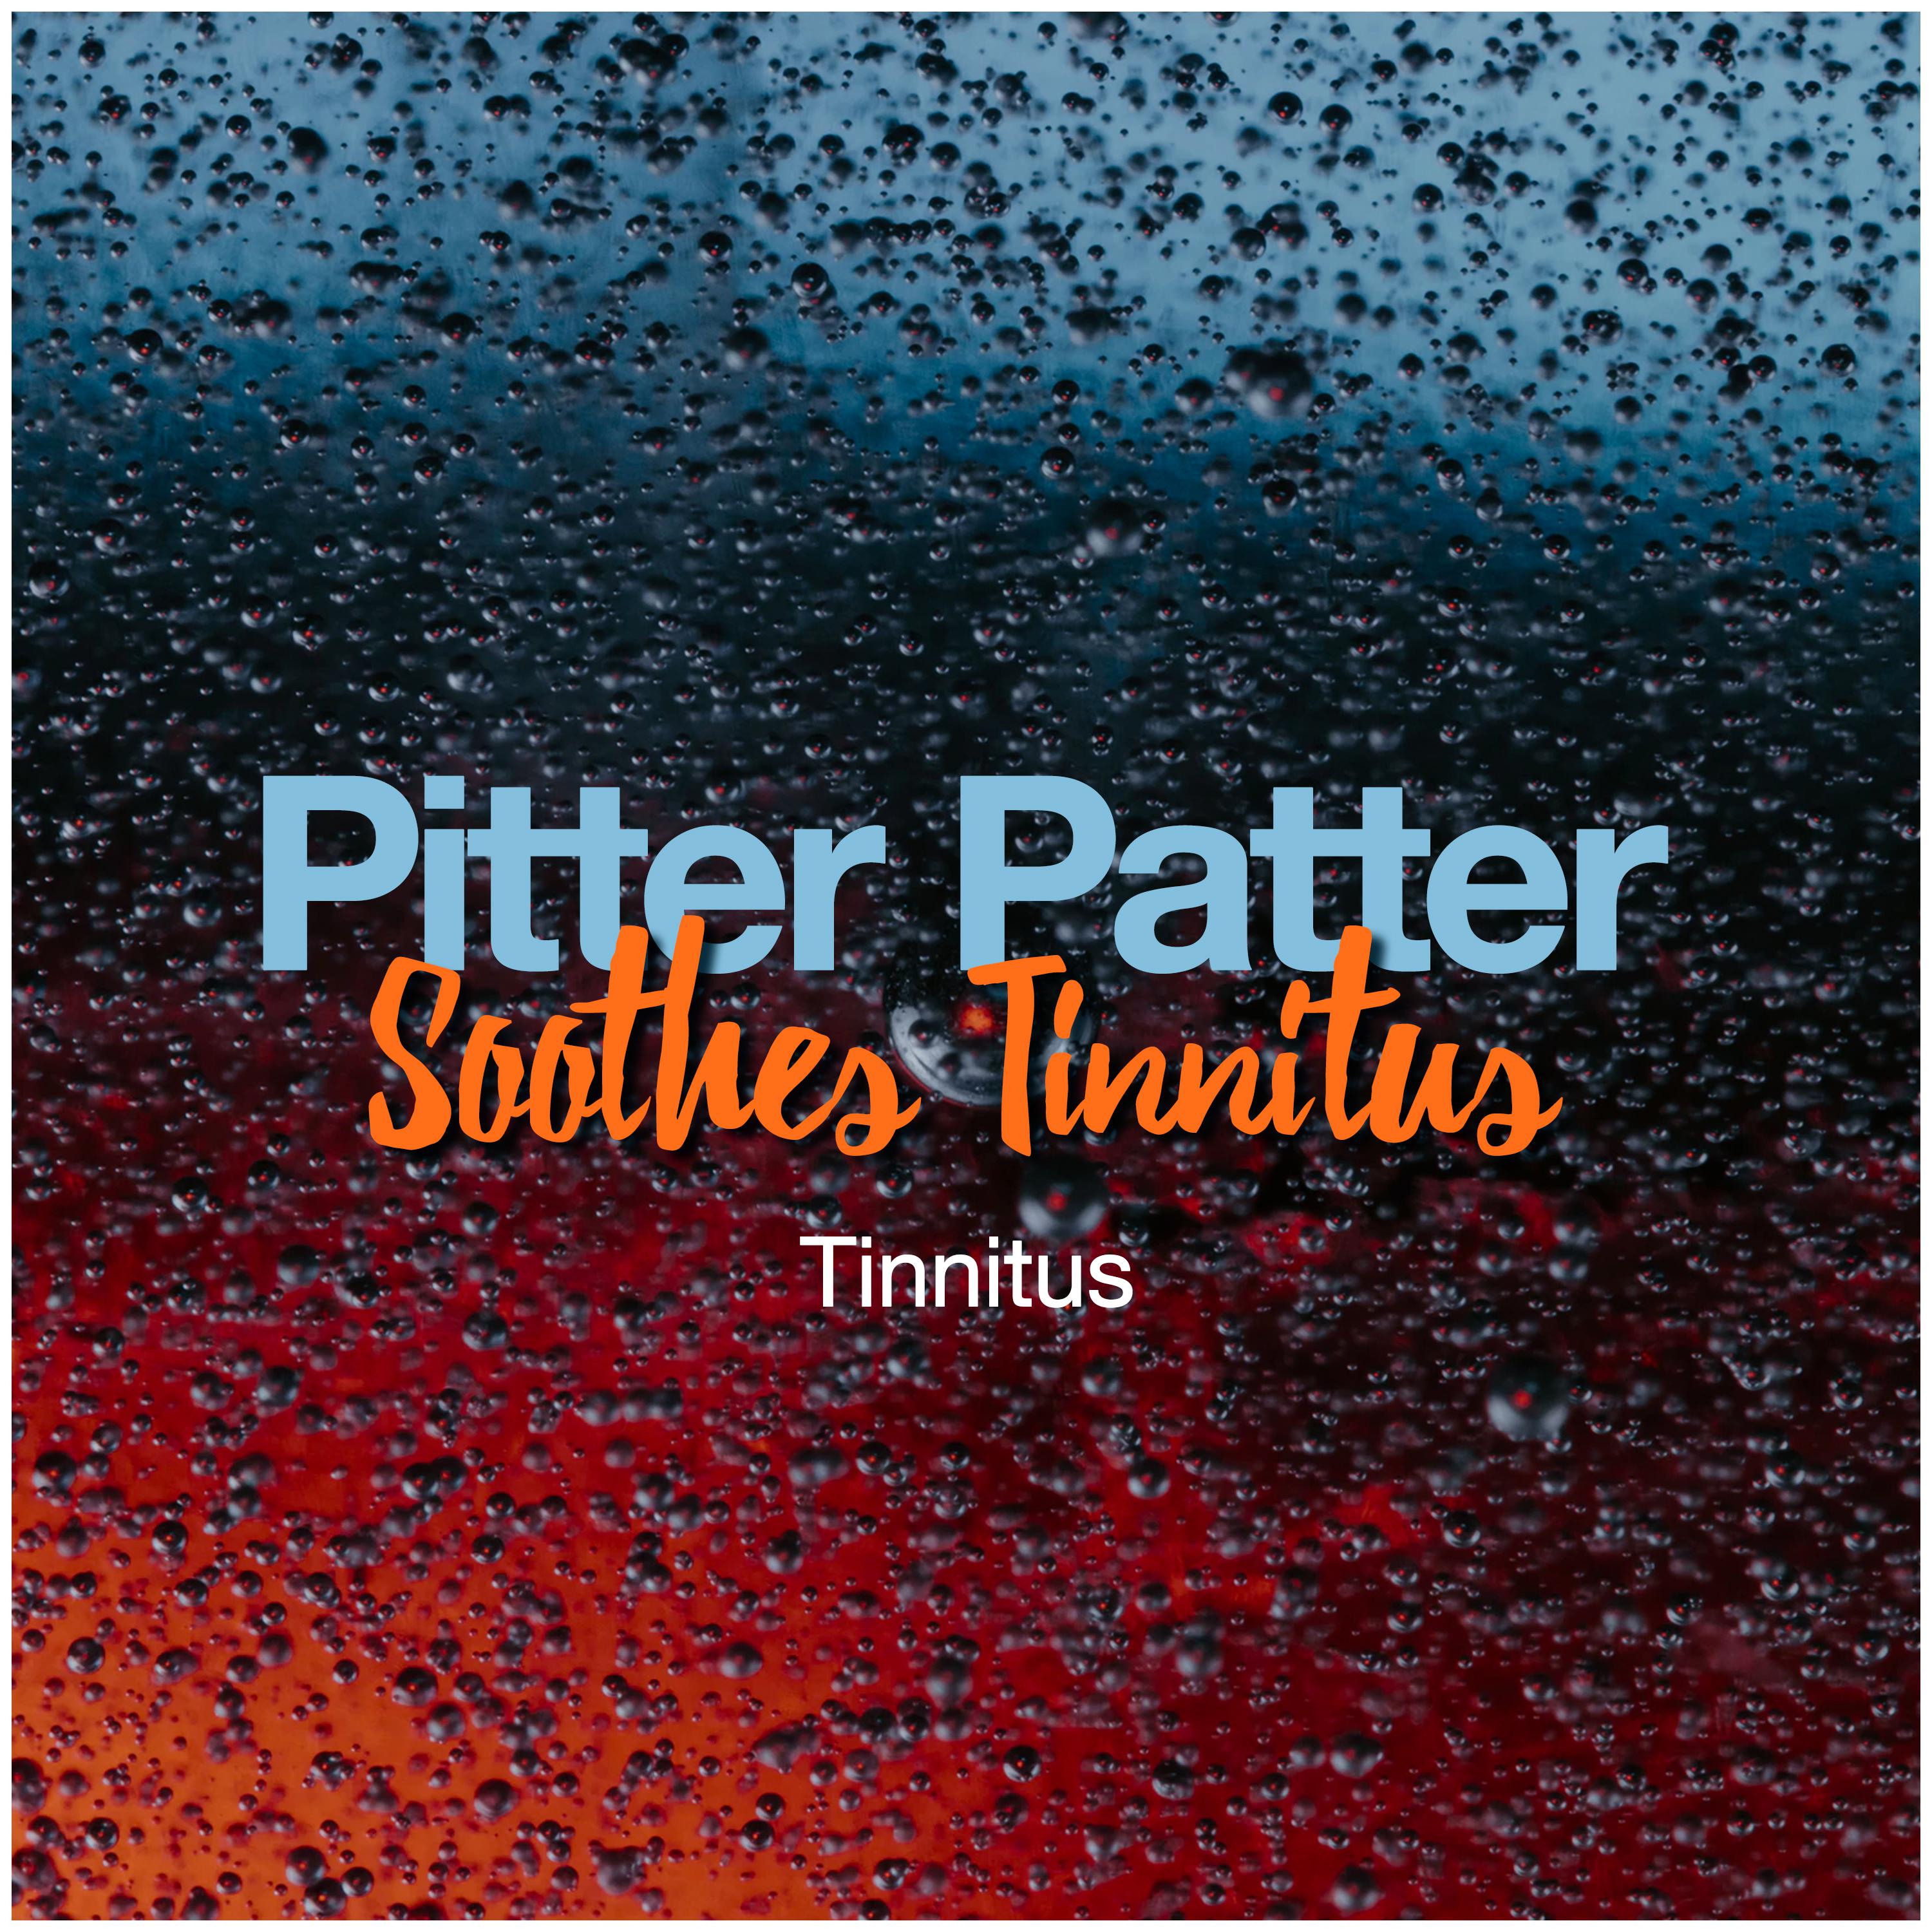 Pitter Patter Soothes Tinnitus